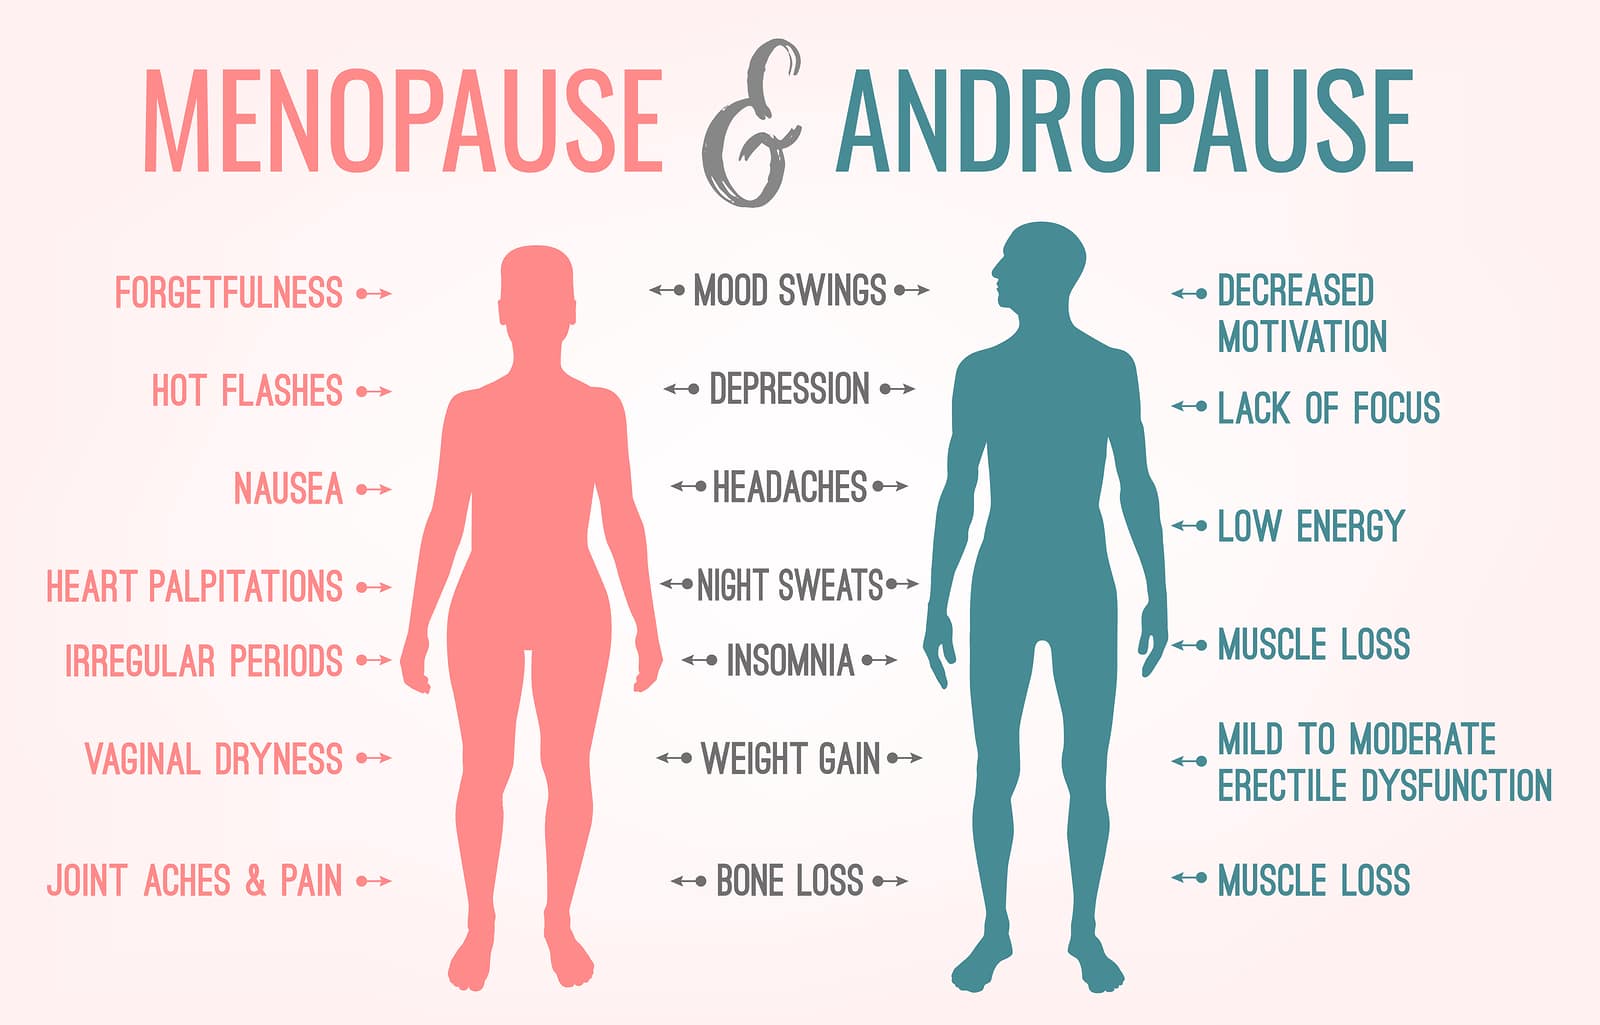 Menopause And Andropause Men And Women Sexual Health Main Symp 9445